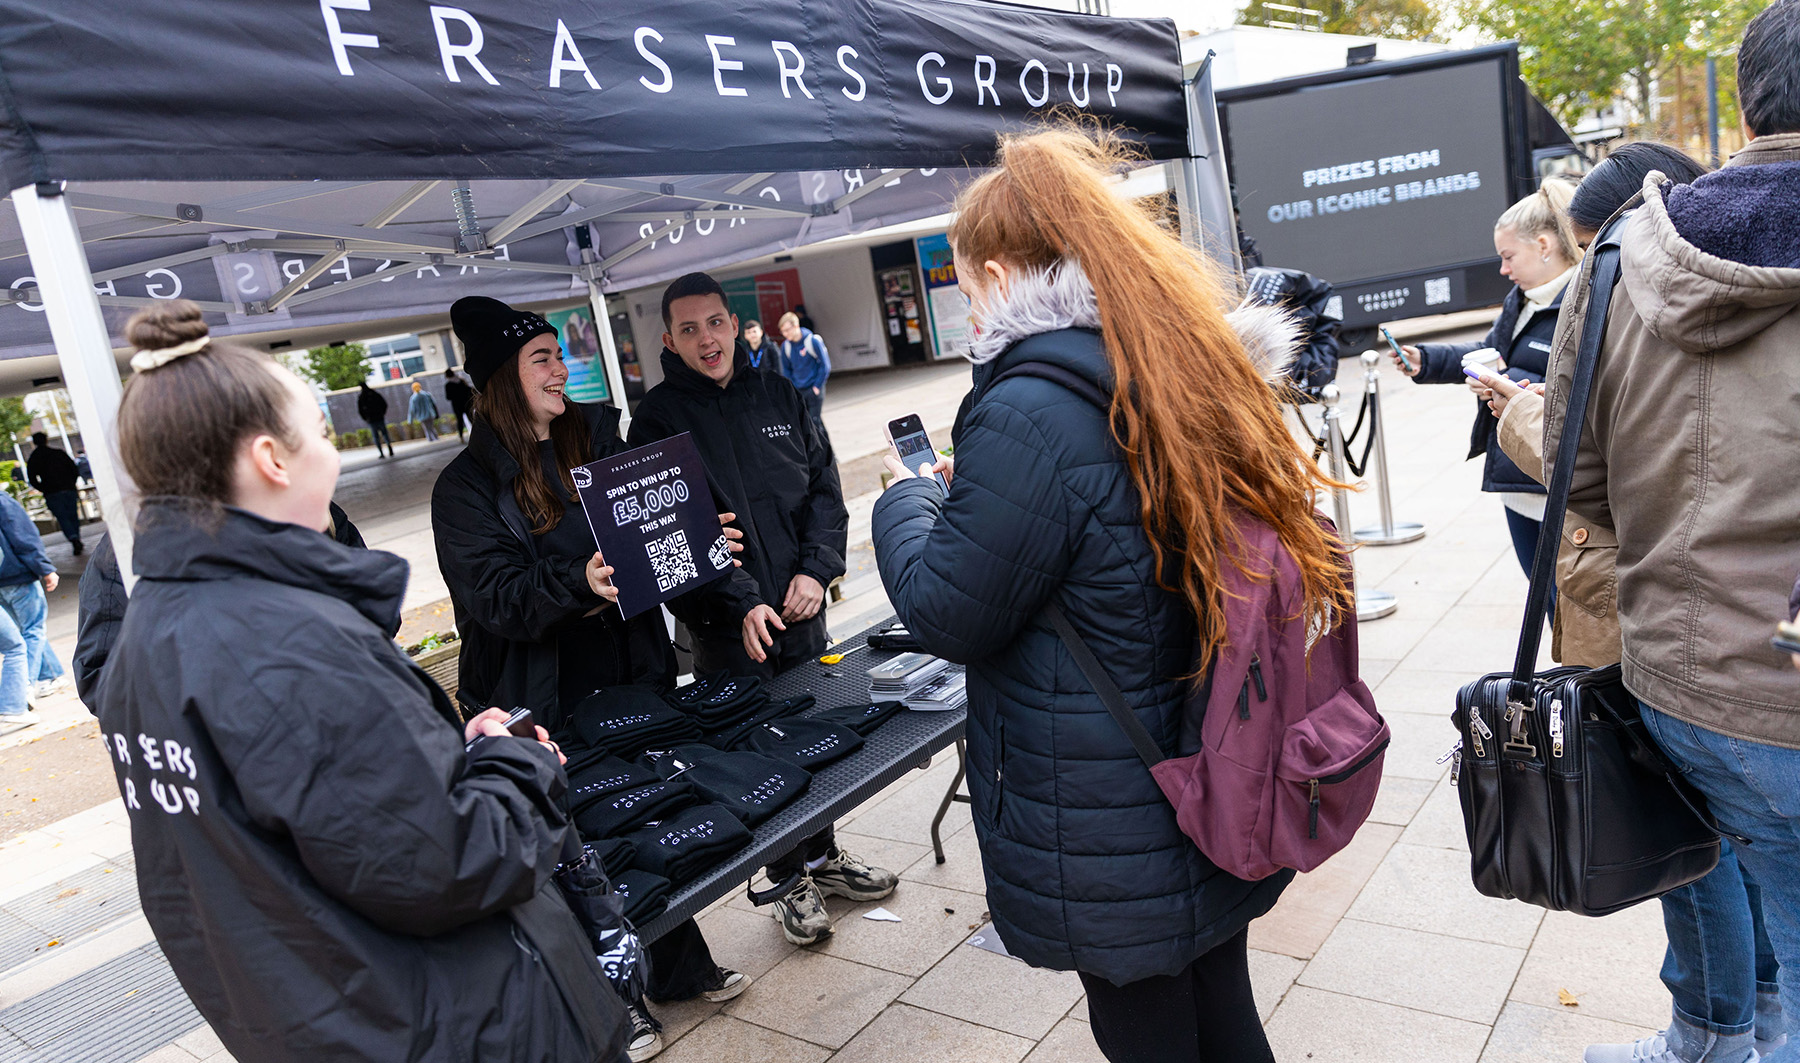 A student scanning the QR code at the Frasers Group stand